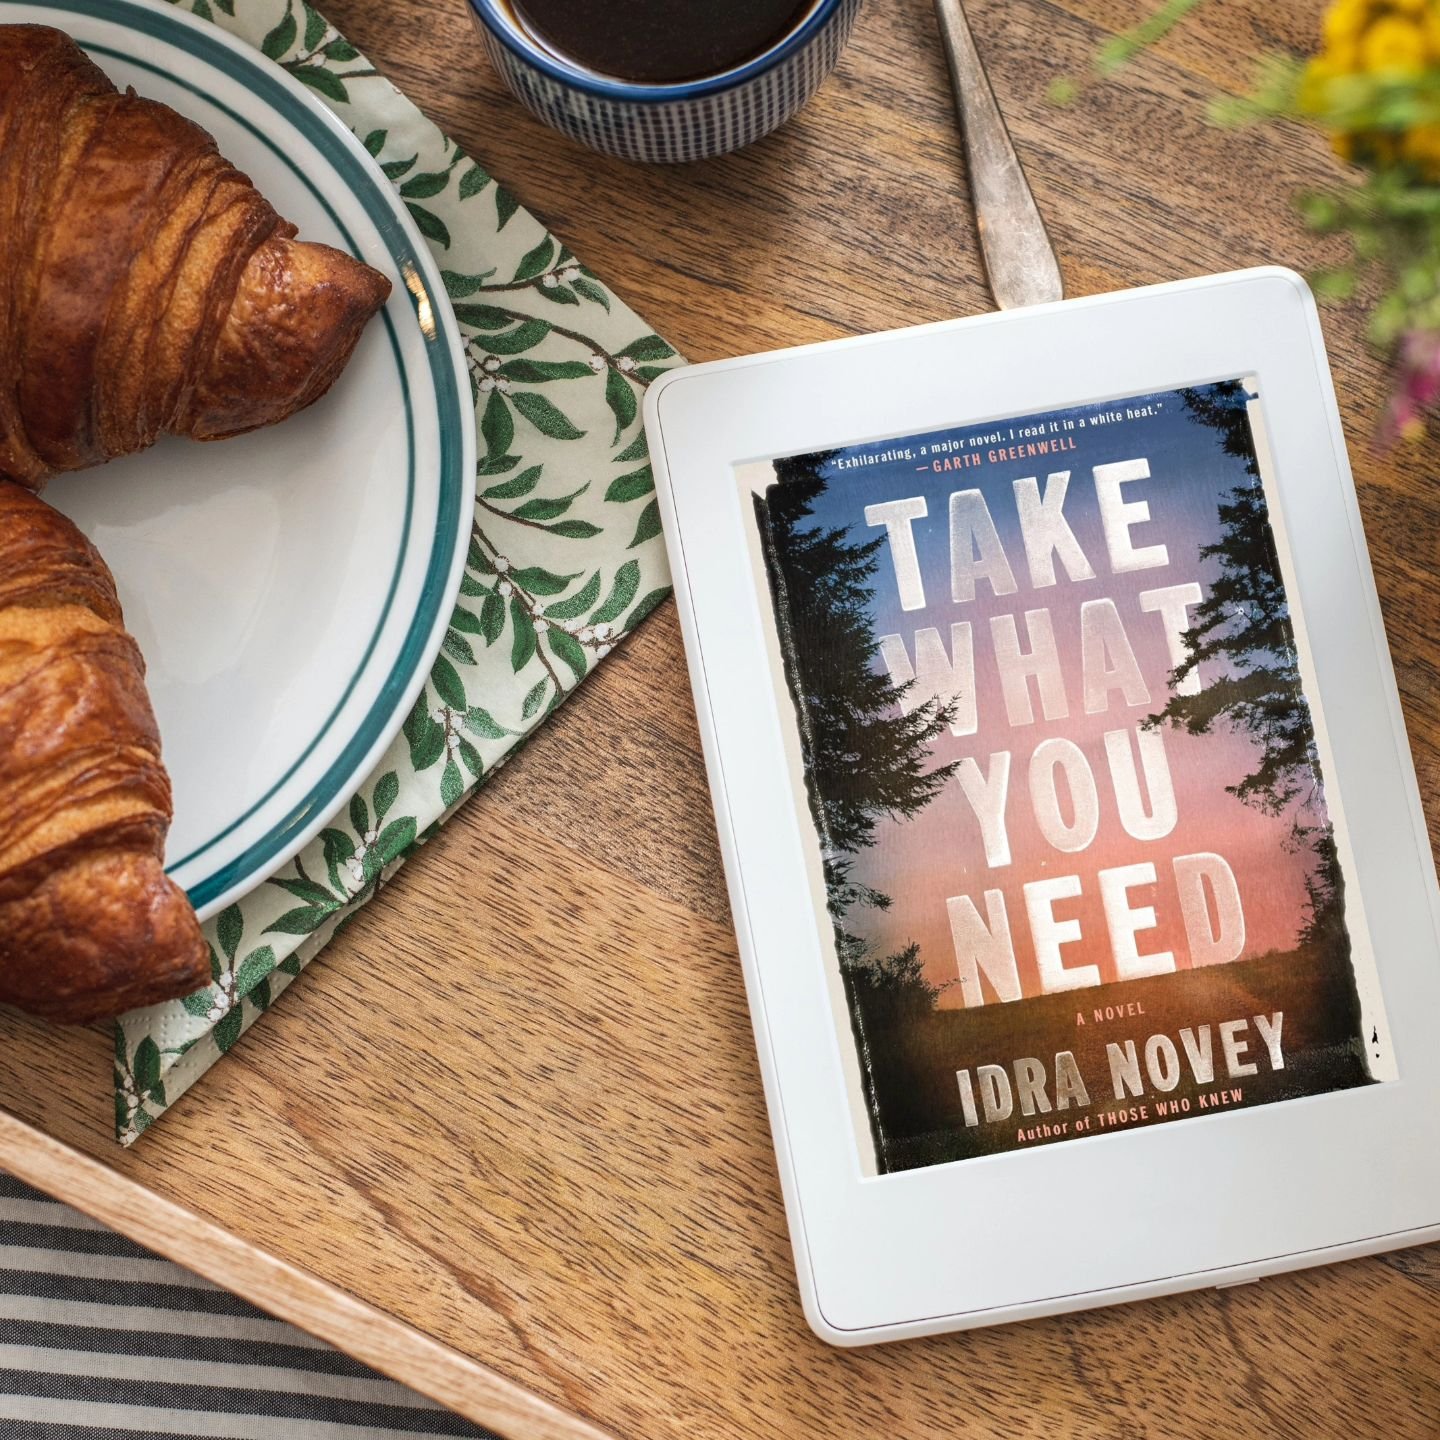 Excited to announce the May selection for our online book club, Paging Creatives: &quot;Take What You Need&quot; by author Idra Novey.

Save the date! Join us to discuss this novel:

📅 Tuesday, May 28th
🕖 8:00 pm EST

Here's why you won't want to m